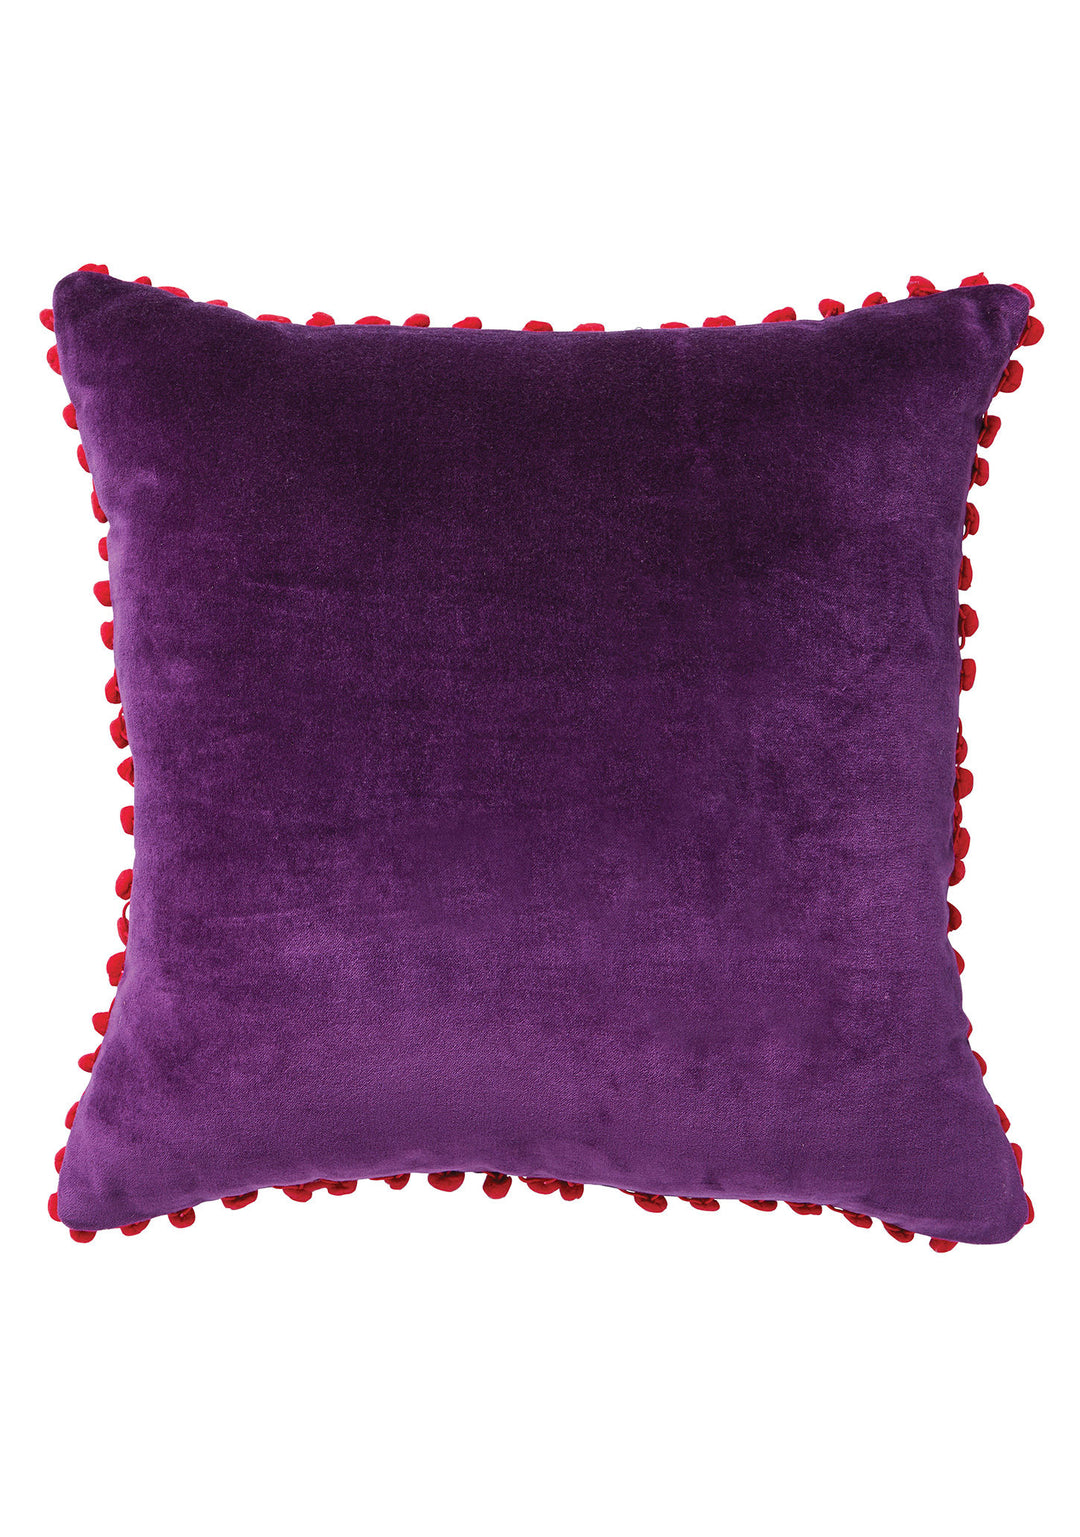 Cotton Velvet Cushion Covers With Pom Pom's 45 cm x 45 cm available In 4 Colours